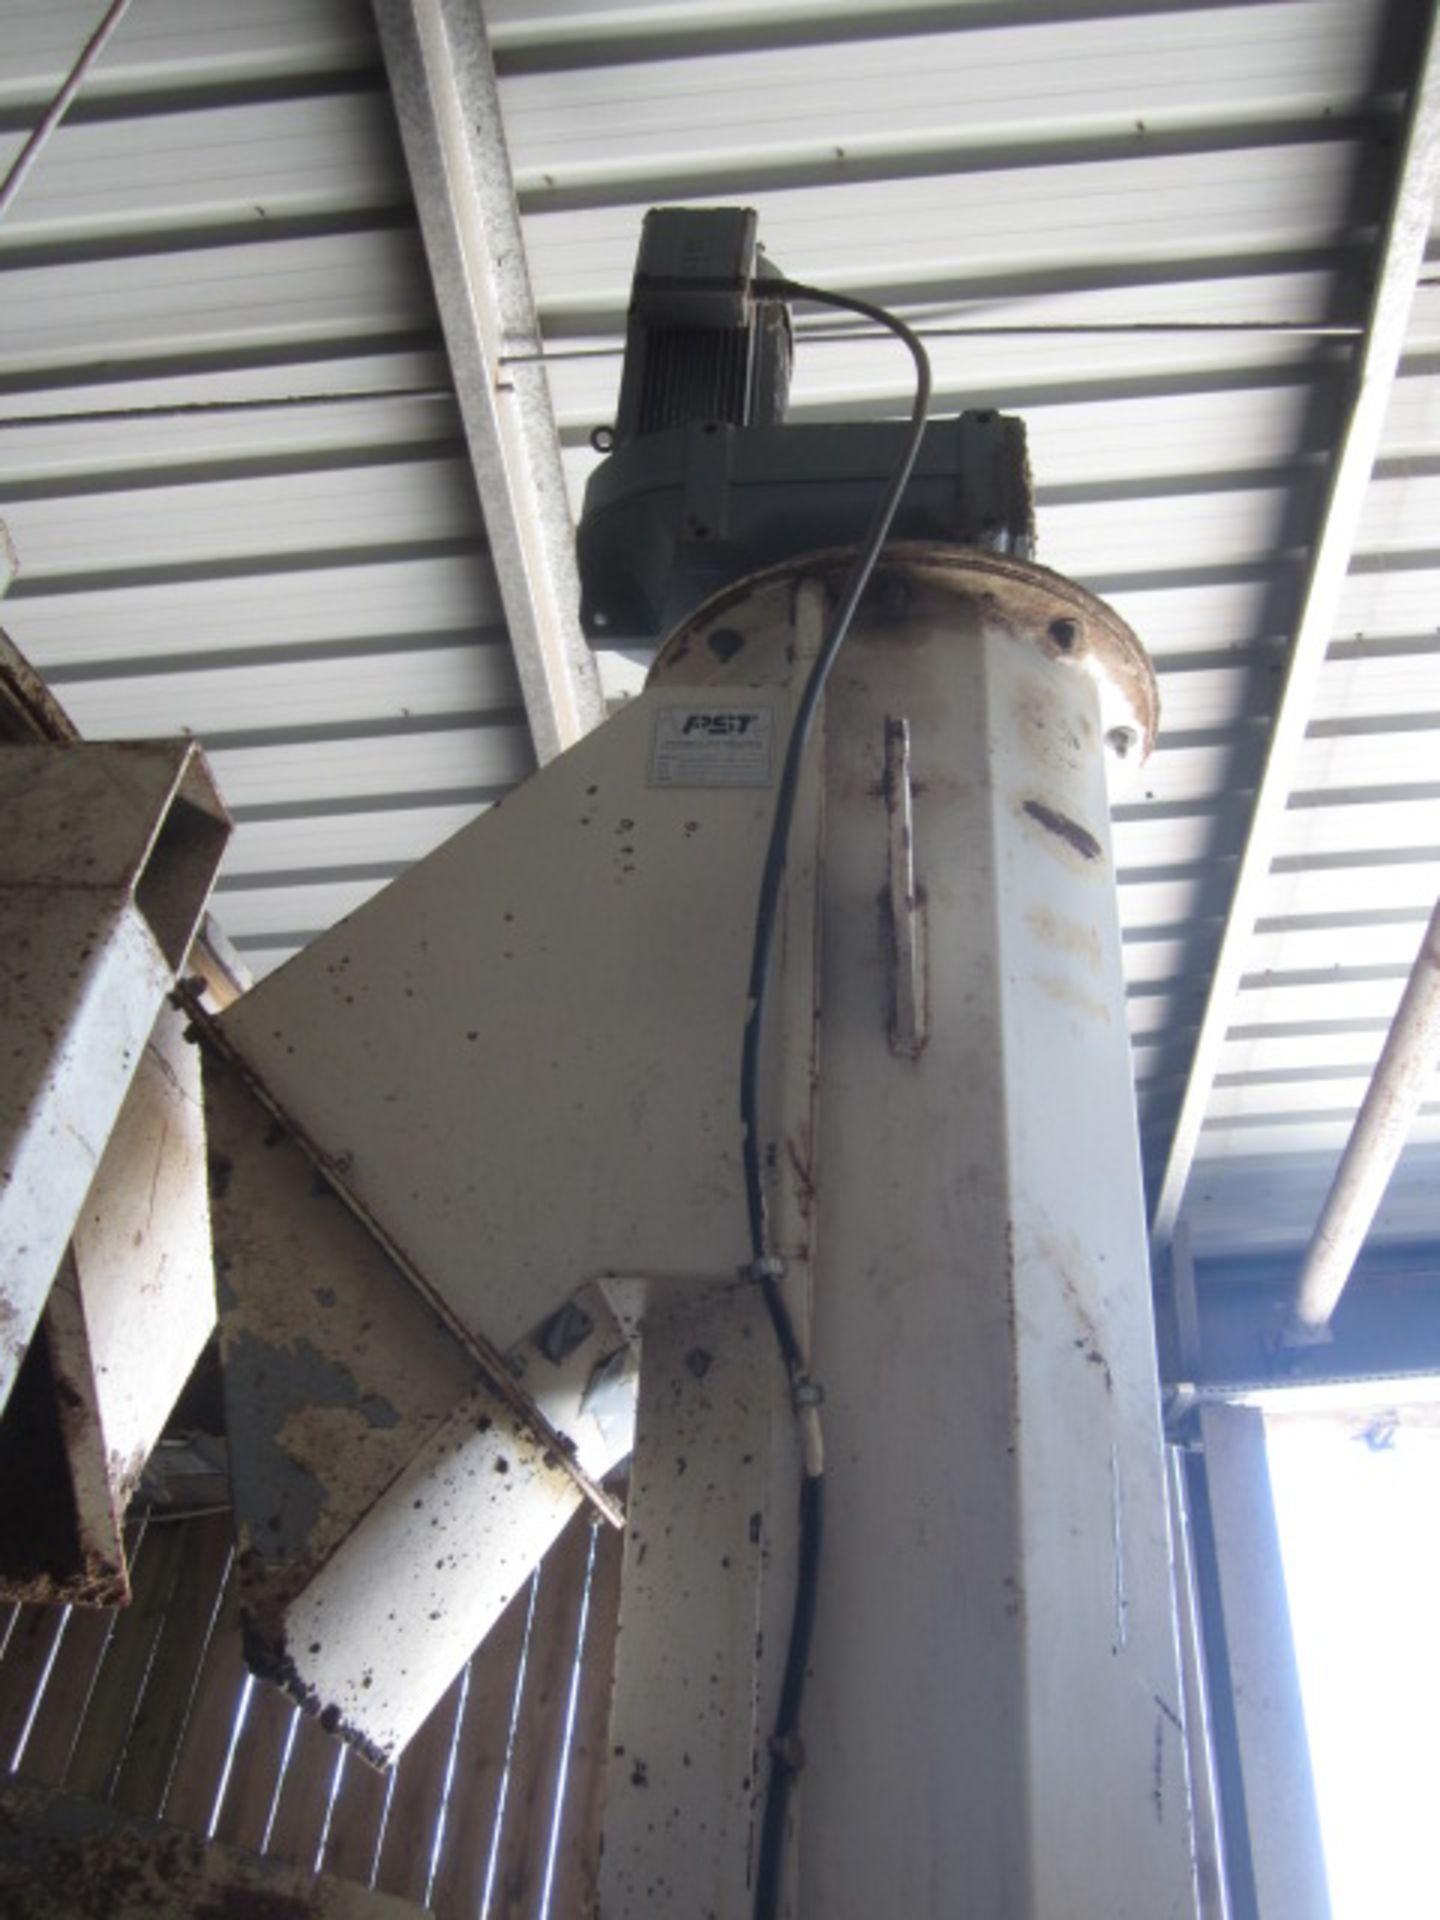 PST V8-420 vertical auger screw conveyor, approx. 9.6m height x 400mm dia, serial no: 1022 U25 ( - Image 3 of 4